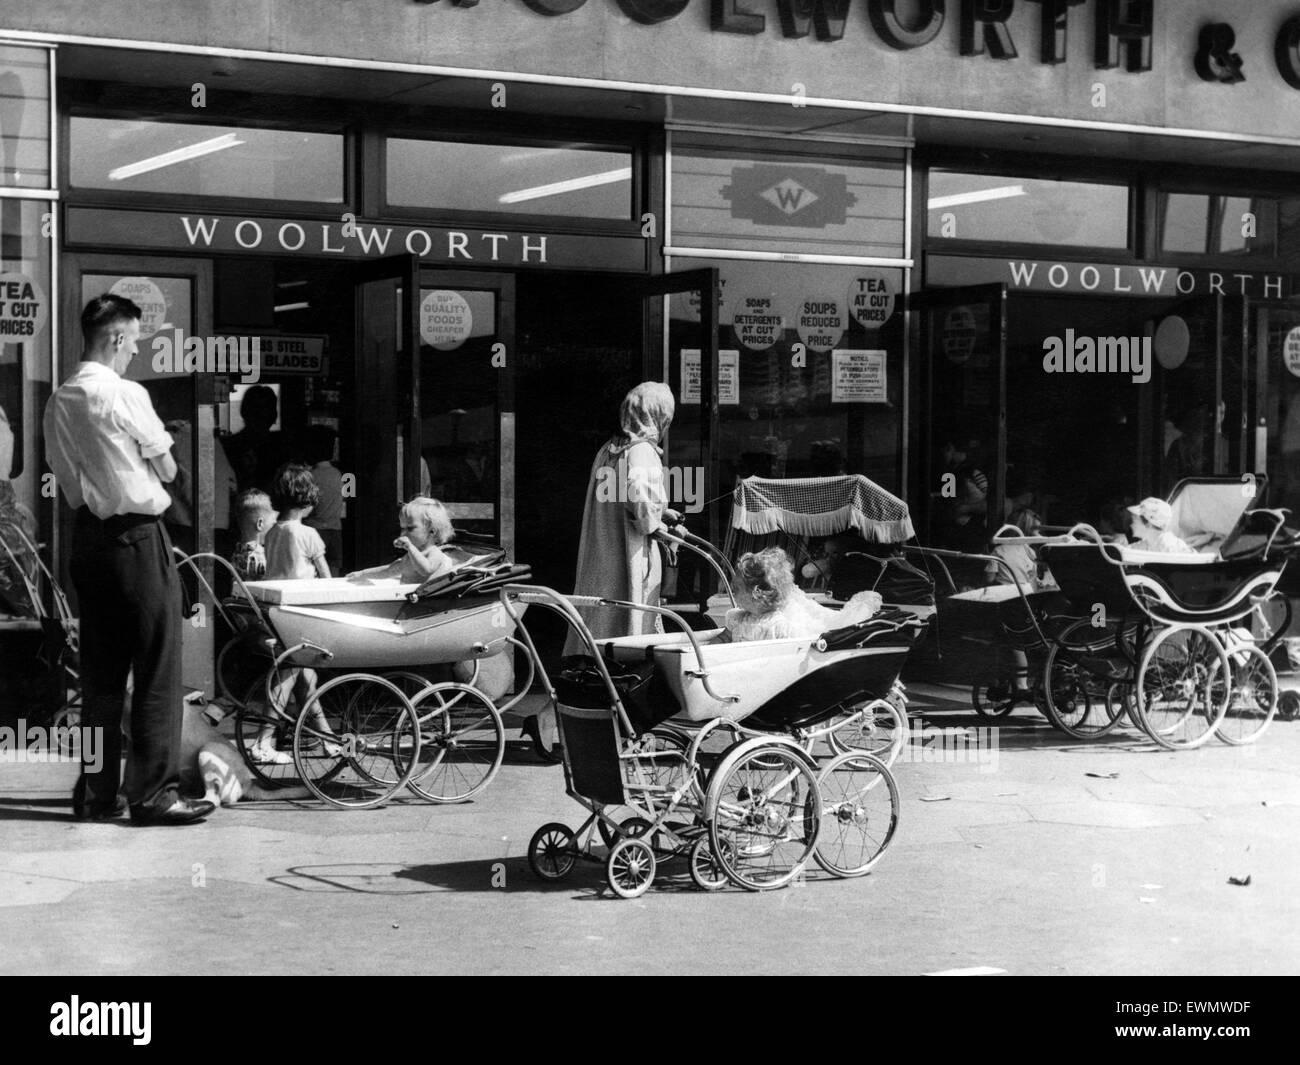 Woolworths 1960s Stock Photos & Woolworths 1960s Stock Images - Alamy1300 x 1065